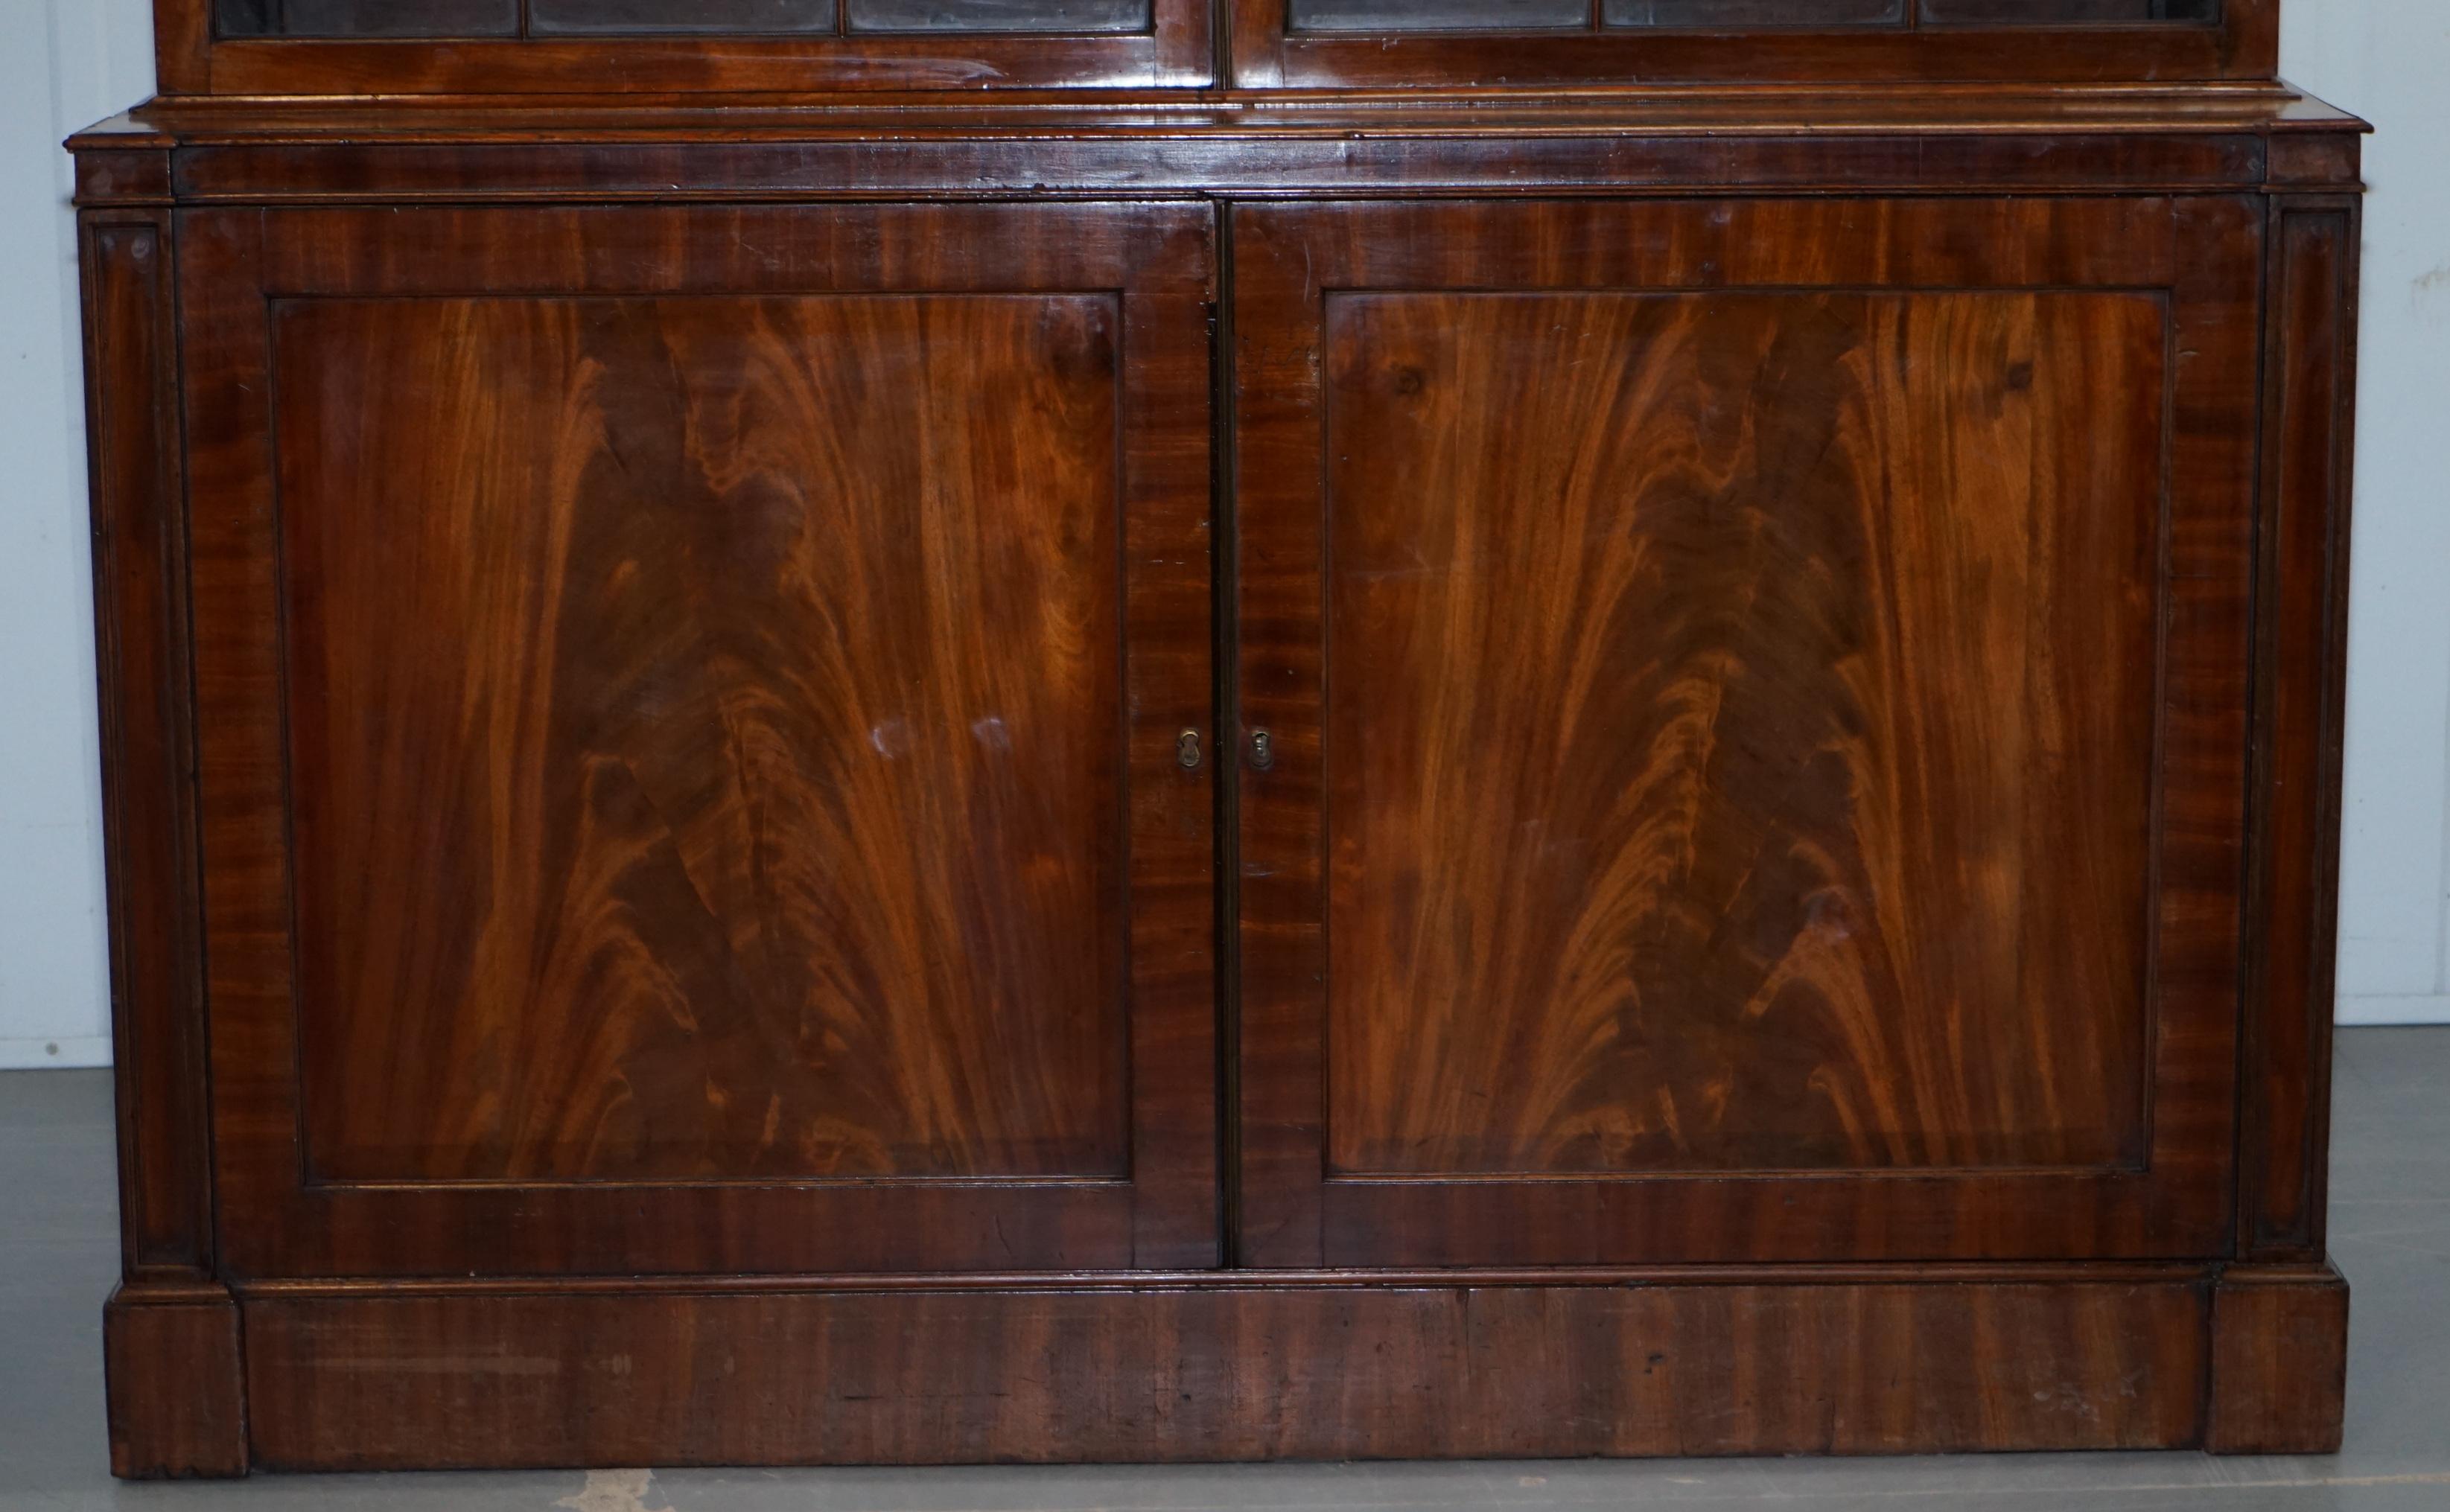 English Very Rare Gillows Astral Glazed Mahogany Bookcase Cabinet Original Paper Labels